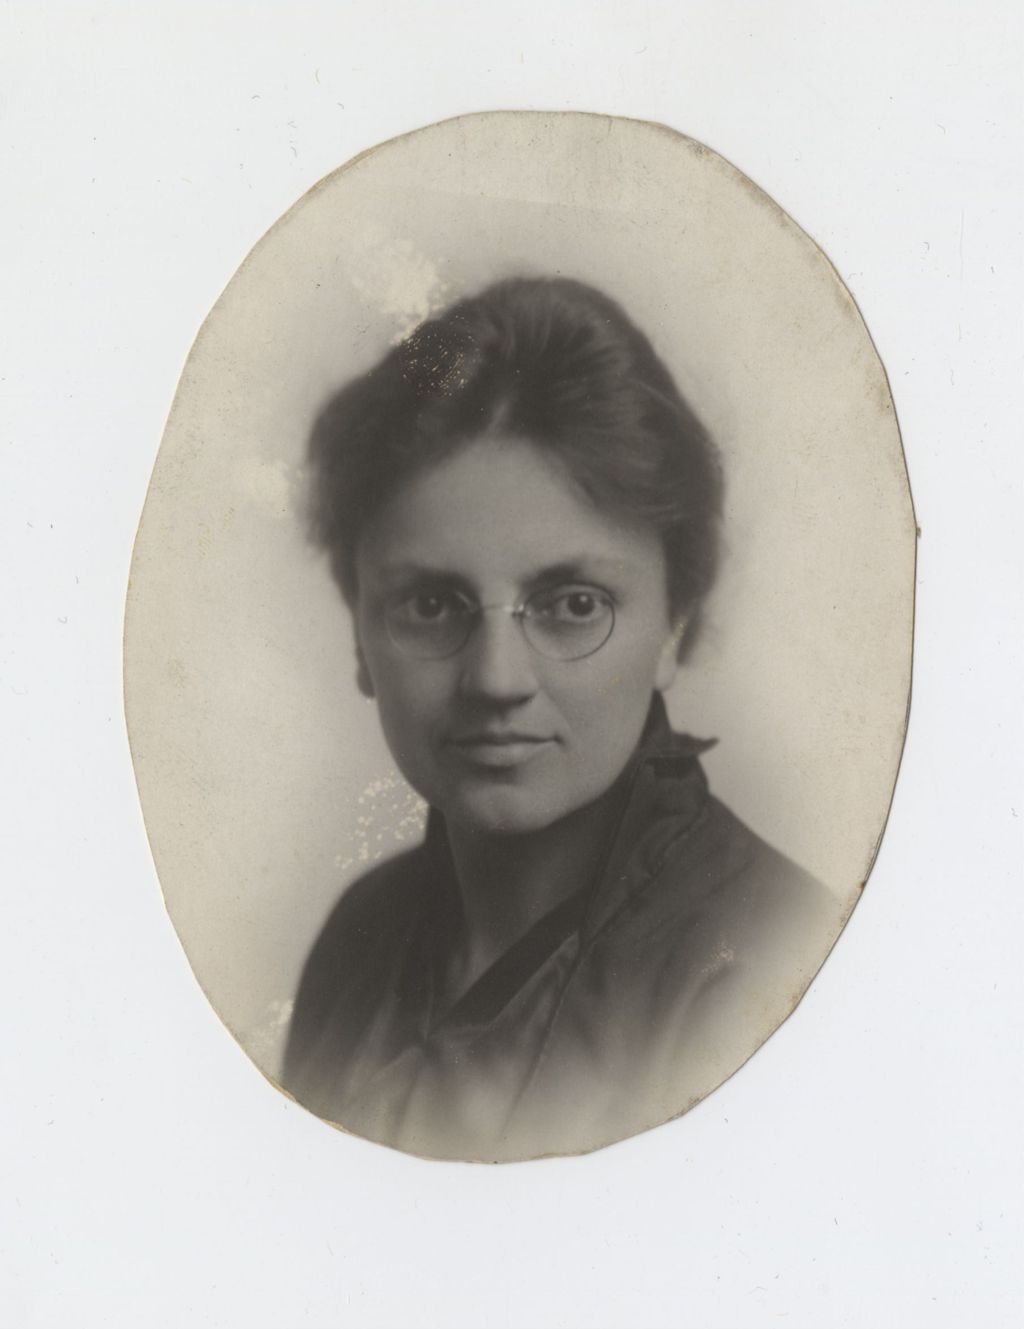 Miniature of Hull-House instructor Winifred Brainerd